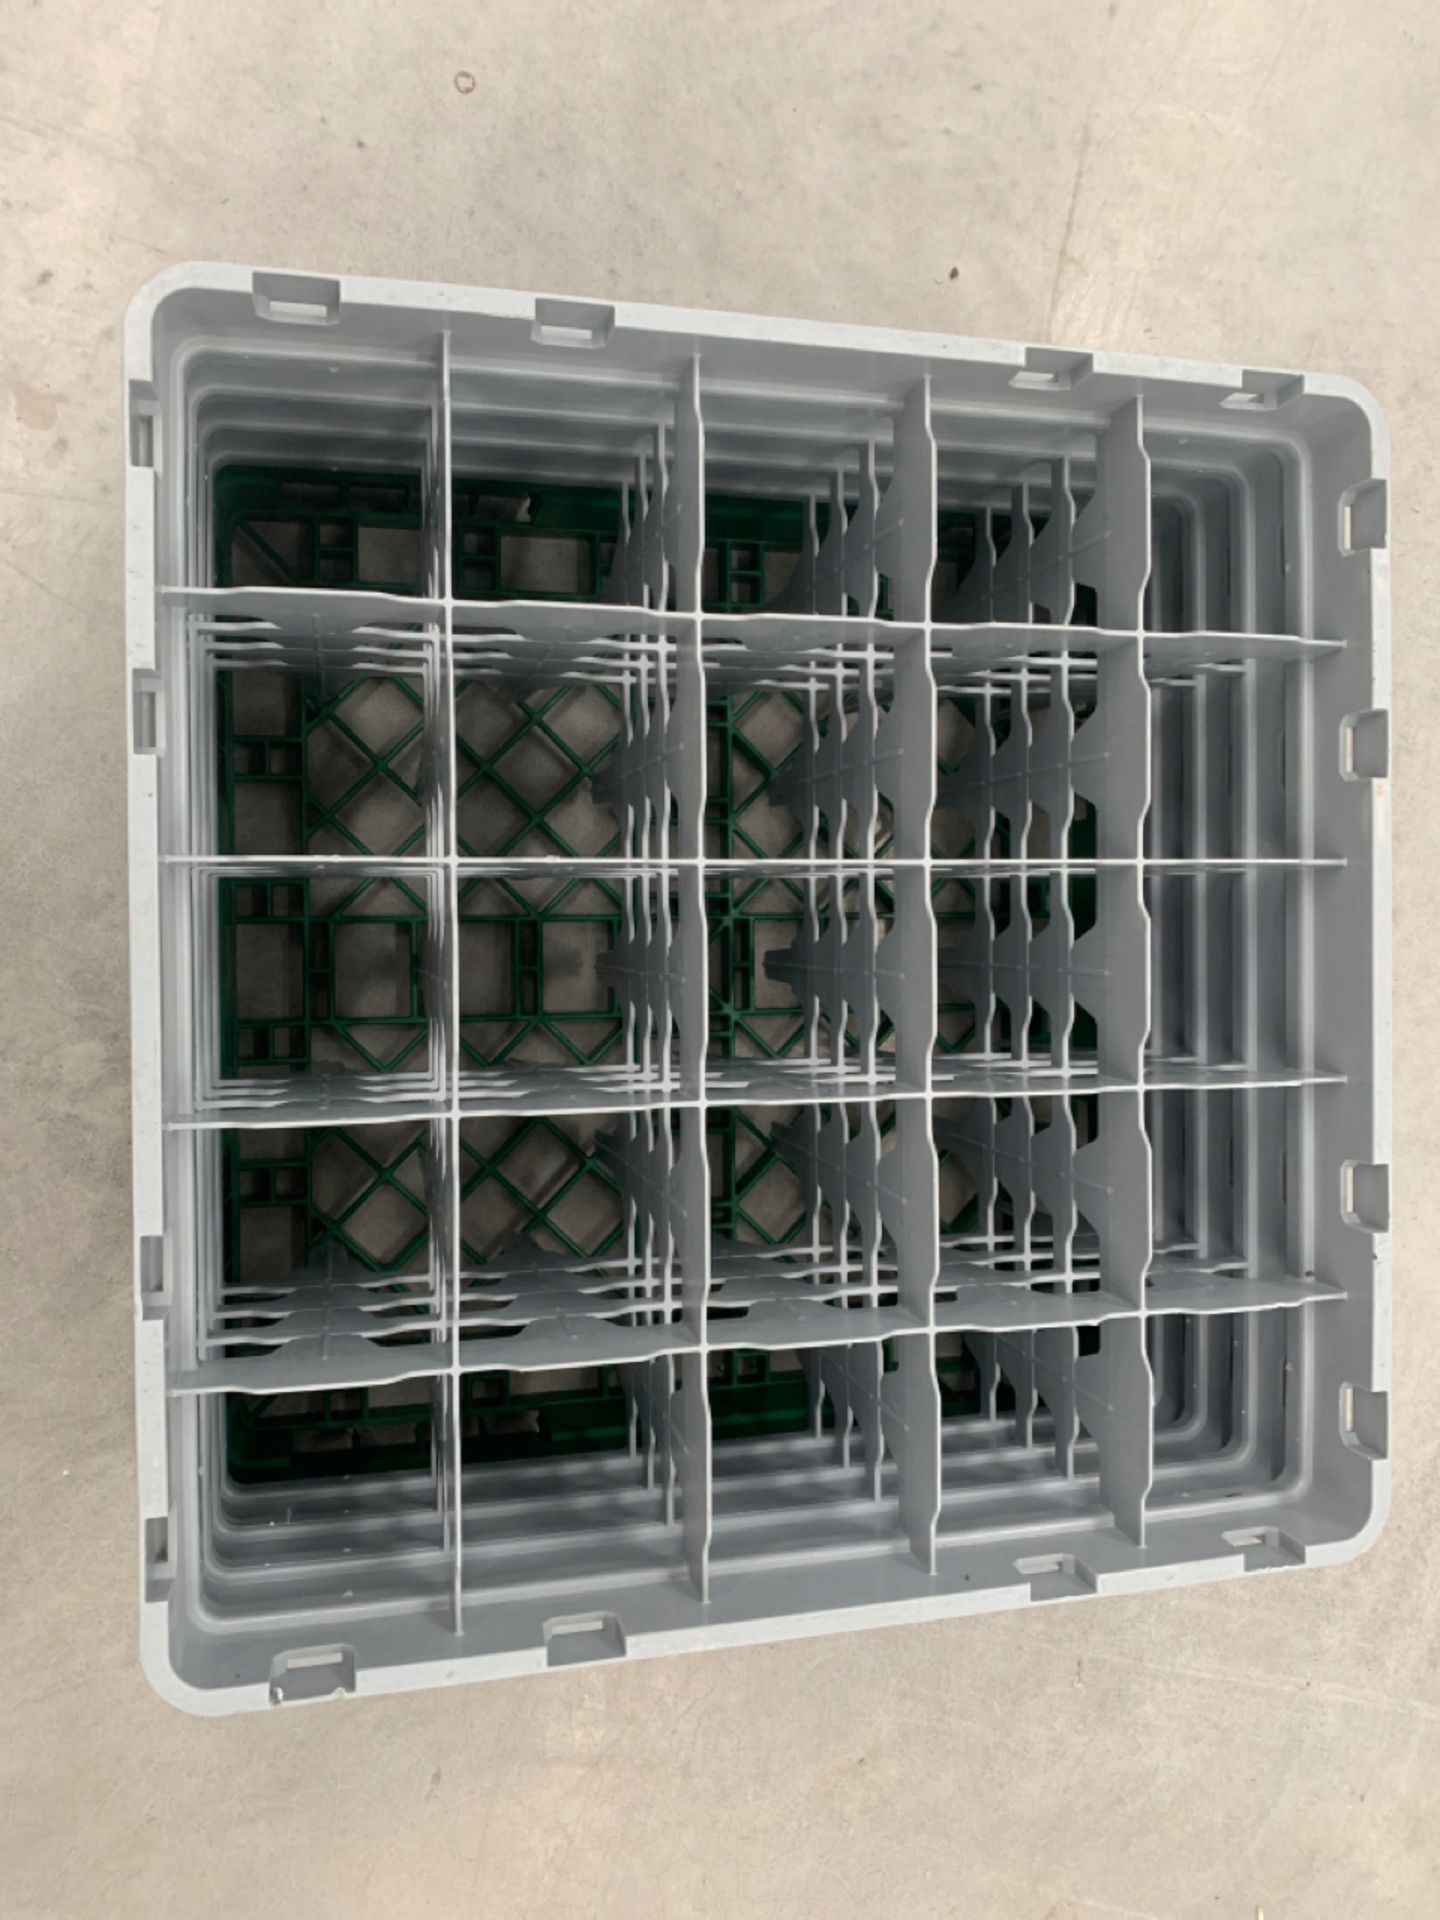 Cambro Camrack Glass Rack 25 Compartments Max Glass Height 215mm - Image 2 of 3